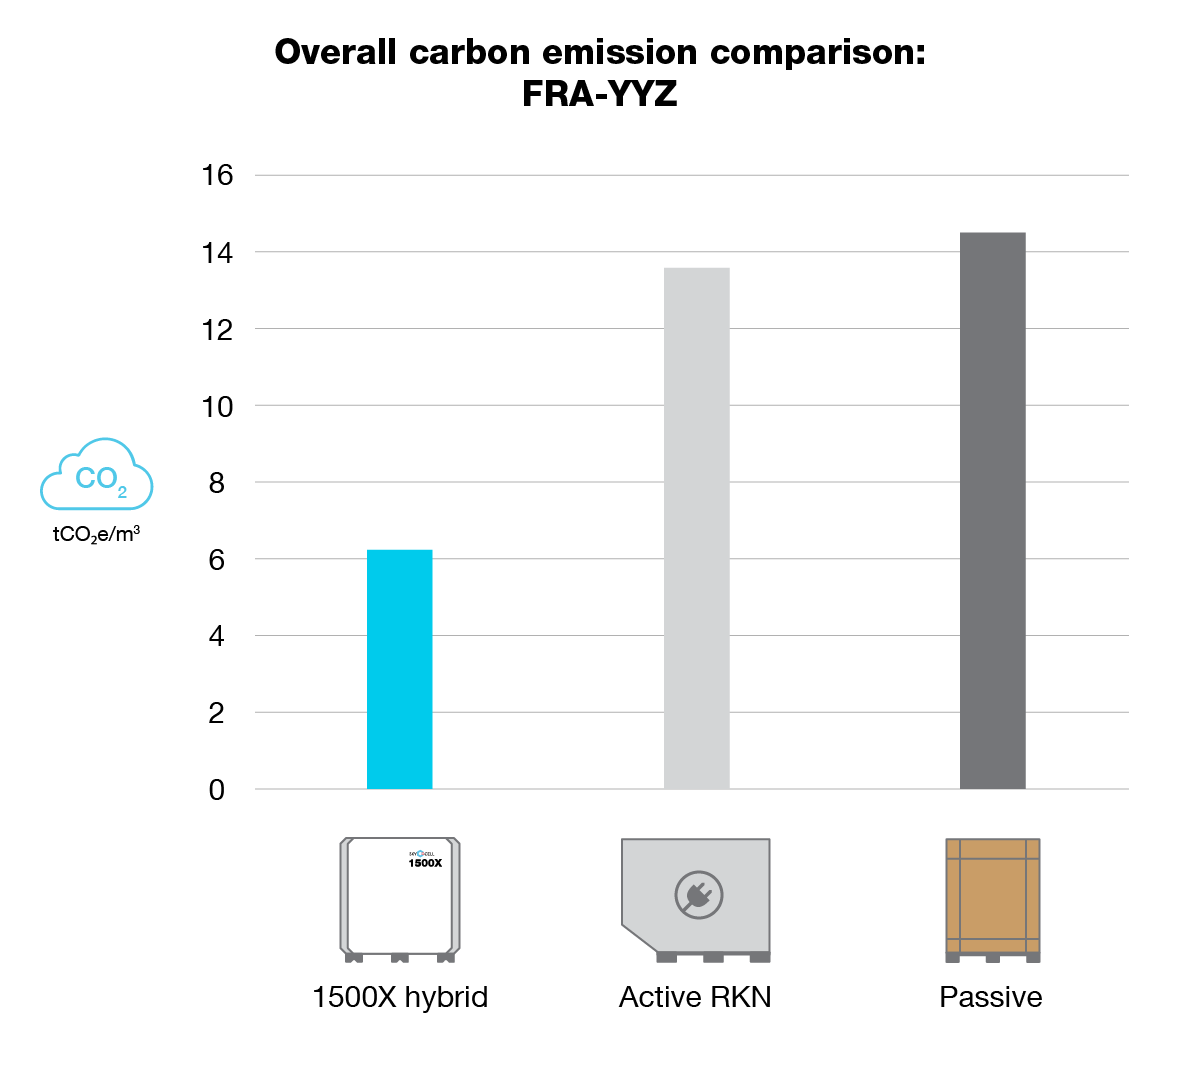 Graph comparing overall carbon emissions of hybrid, active and passive containers over FRA-YYZ lane